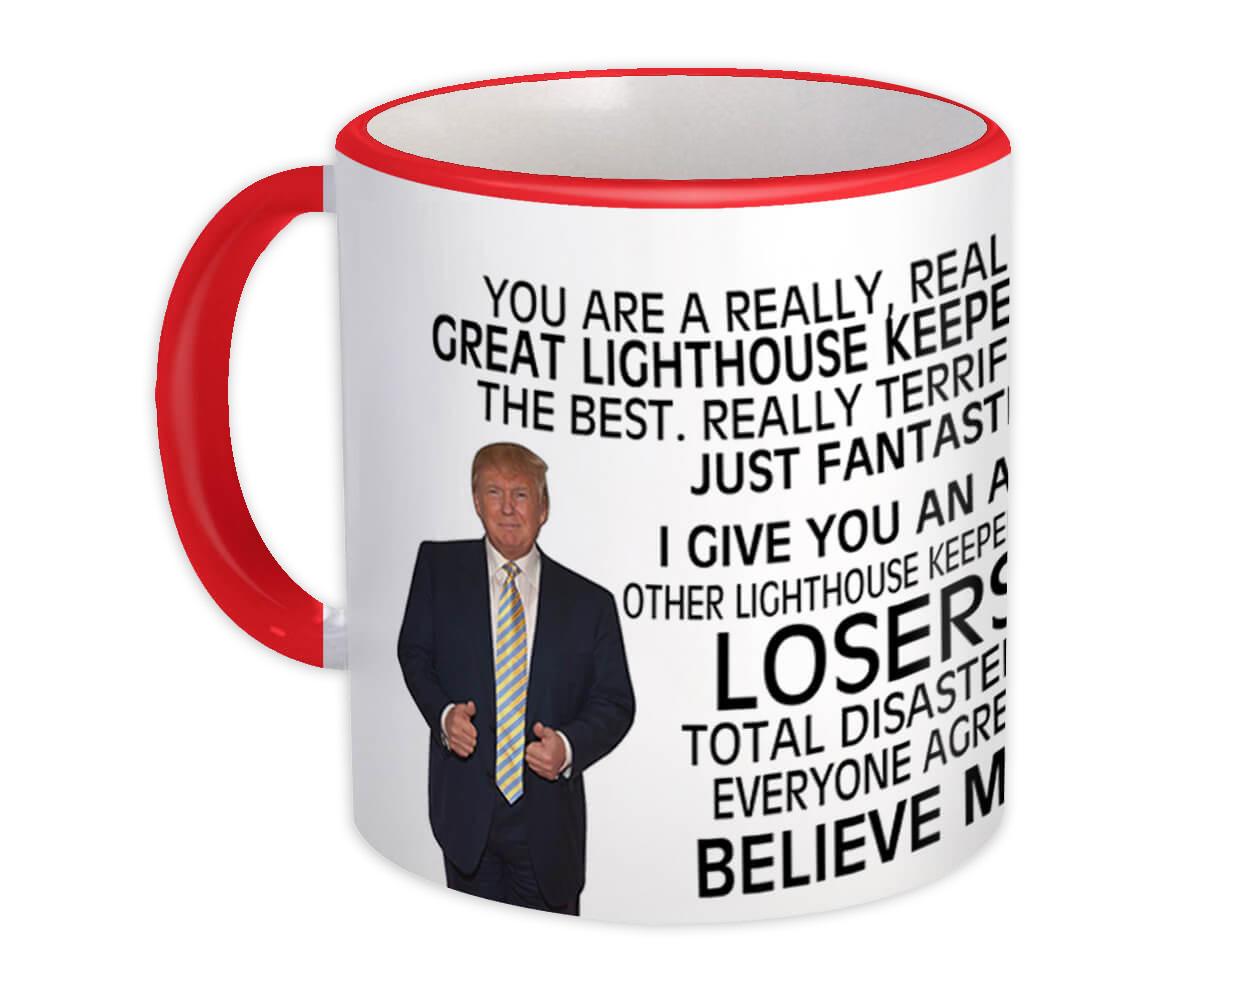 Details about   LIGHTHOUSE KEEPER Gift Funny Trump Mug Great Birthday Christmas Jobs 